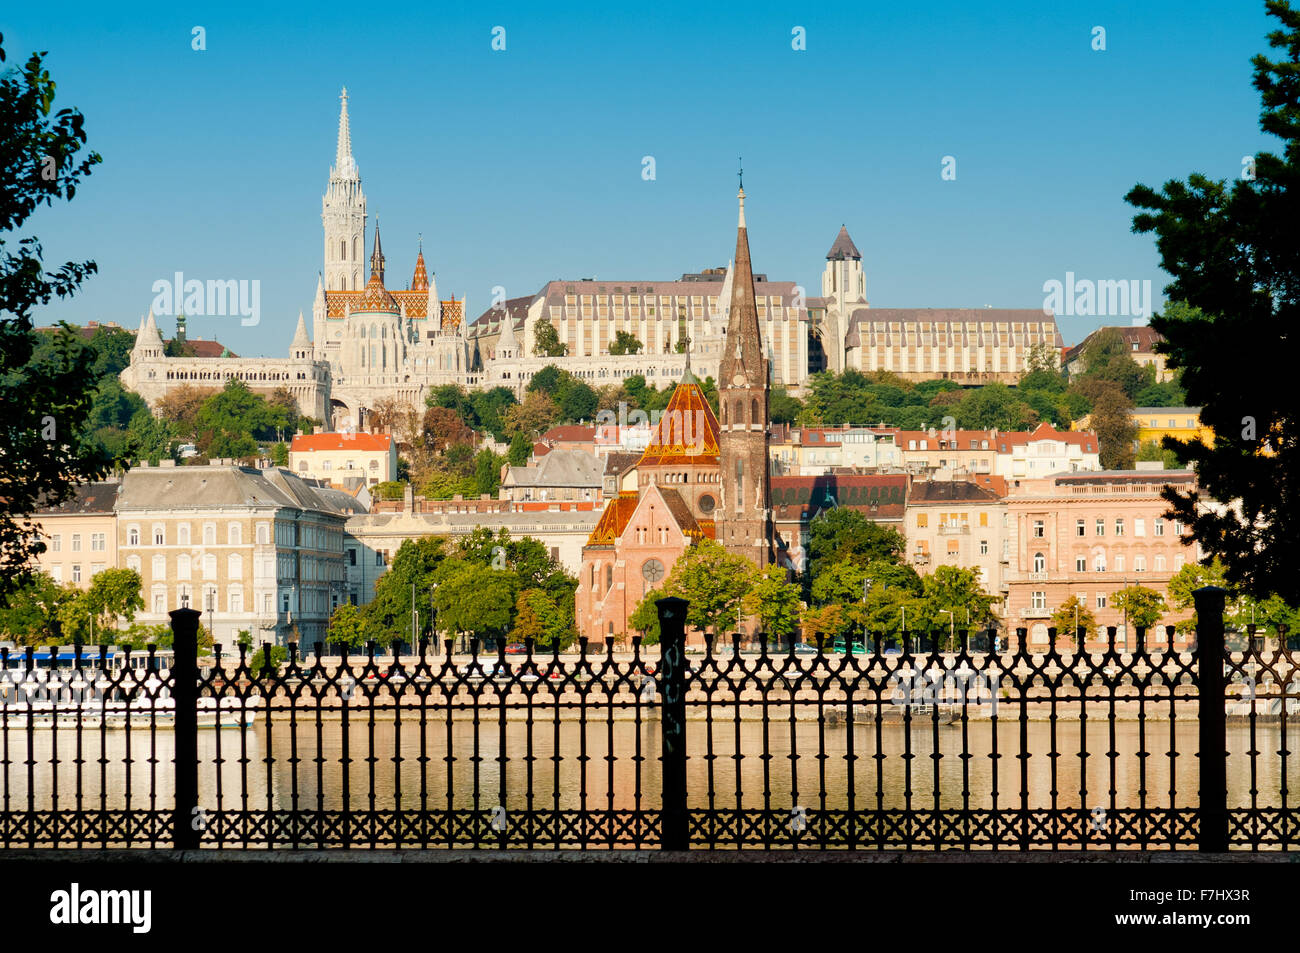 Budapest city view with Watertown and Buda Castle, budapest, Hungary Stock Photo